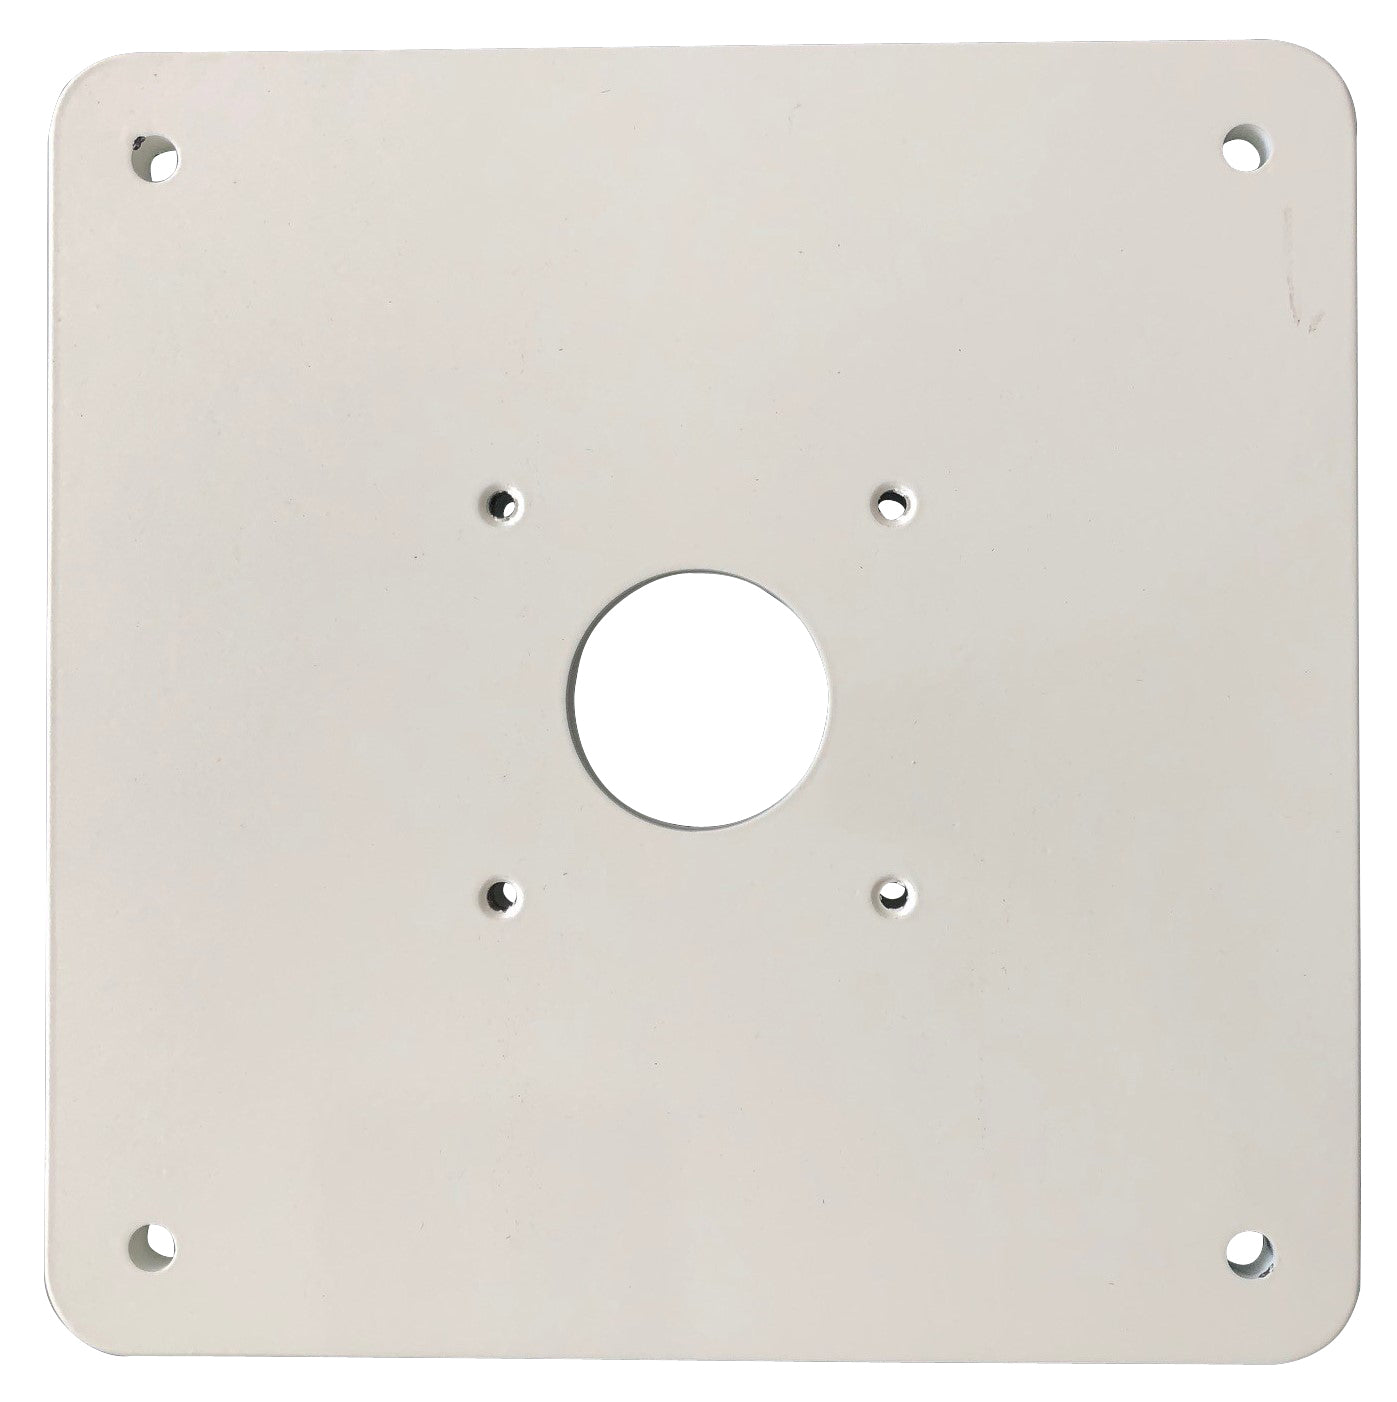 Mounting Plate for Ceratherm Radiant Warmer Wall Bracket